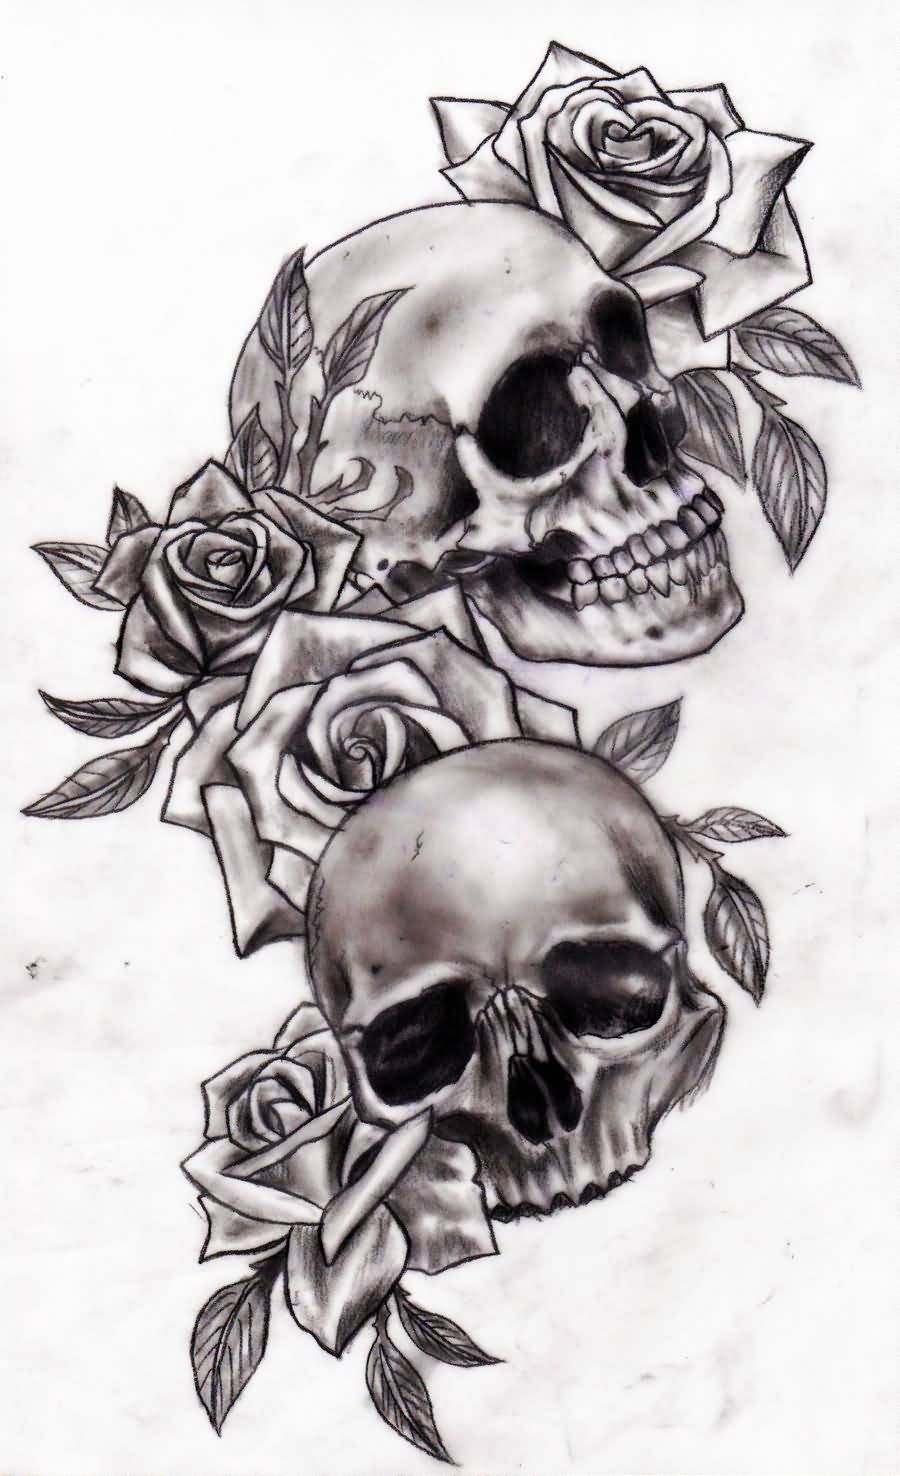 Grey shaded skulls and roses tattoo design by Slabzzz